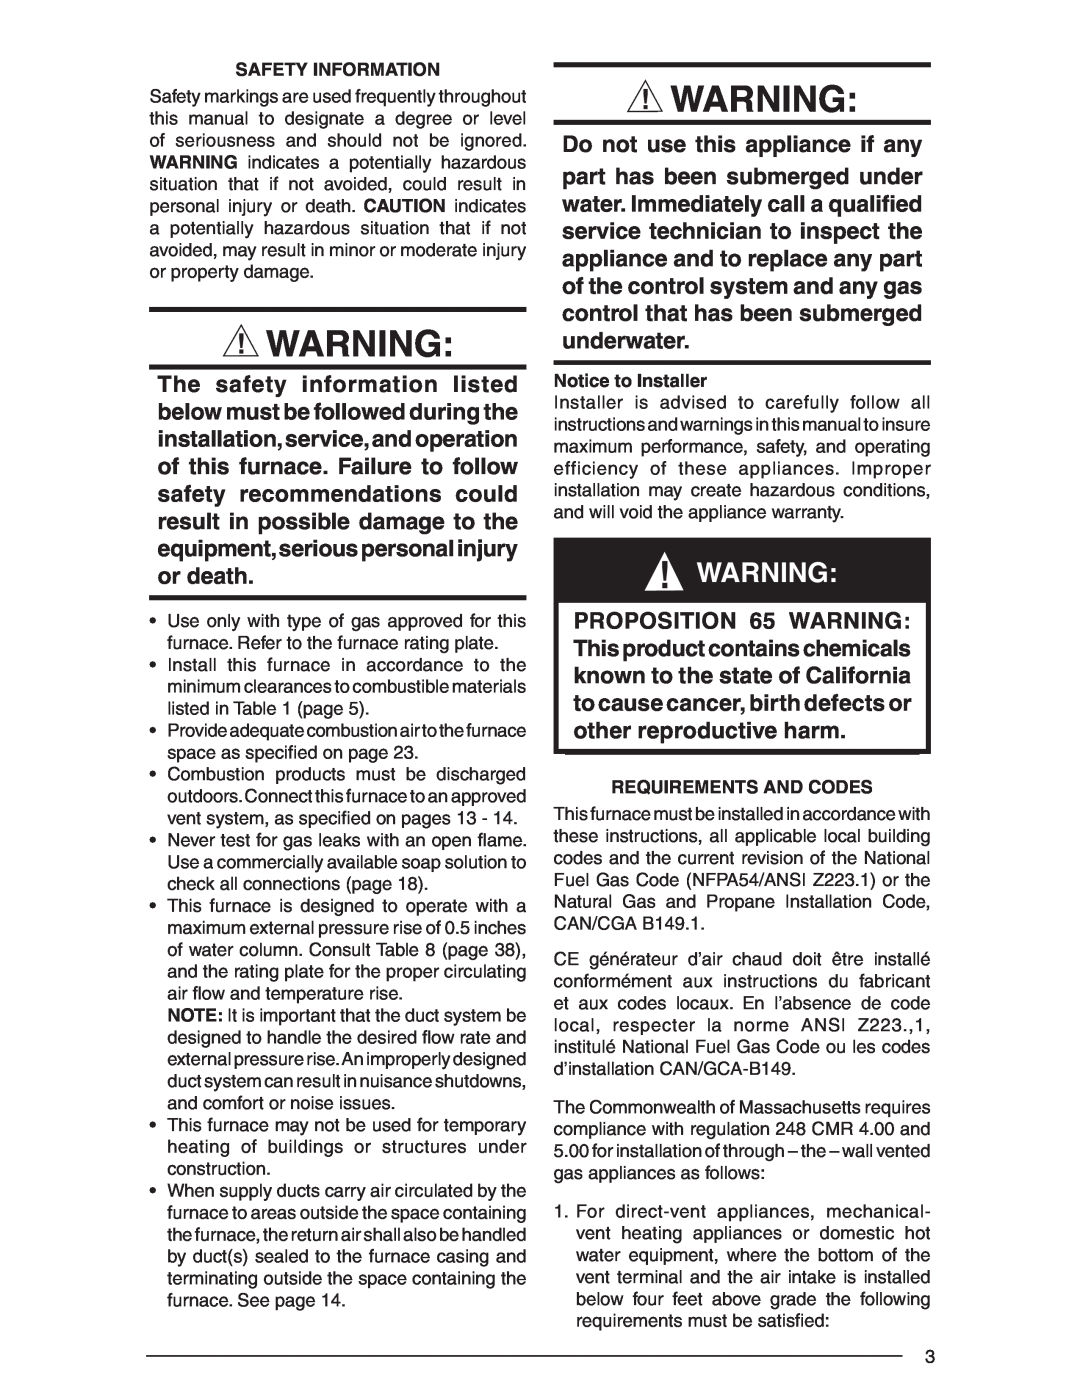 Nordyne AND M5S, SERIES M1B installation instructions Safety Information, Notice to Installer, Requirements And Codes 